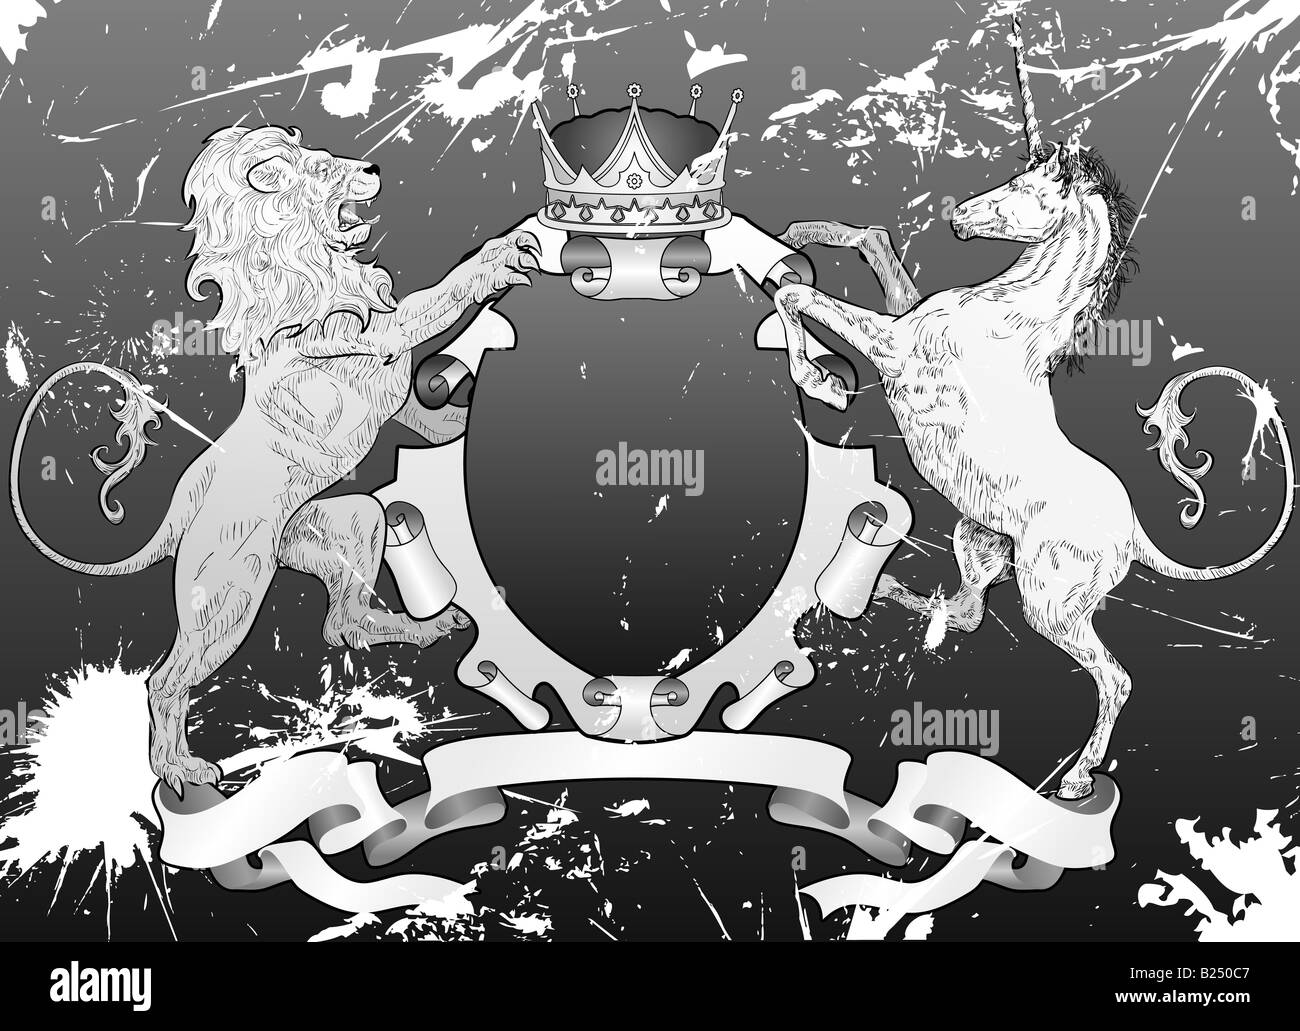 Grunge Lion and Unicorn Shield A grunge shield coat of arms element featuring a lion, unicorn and crown Stock Photo